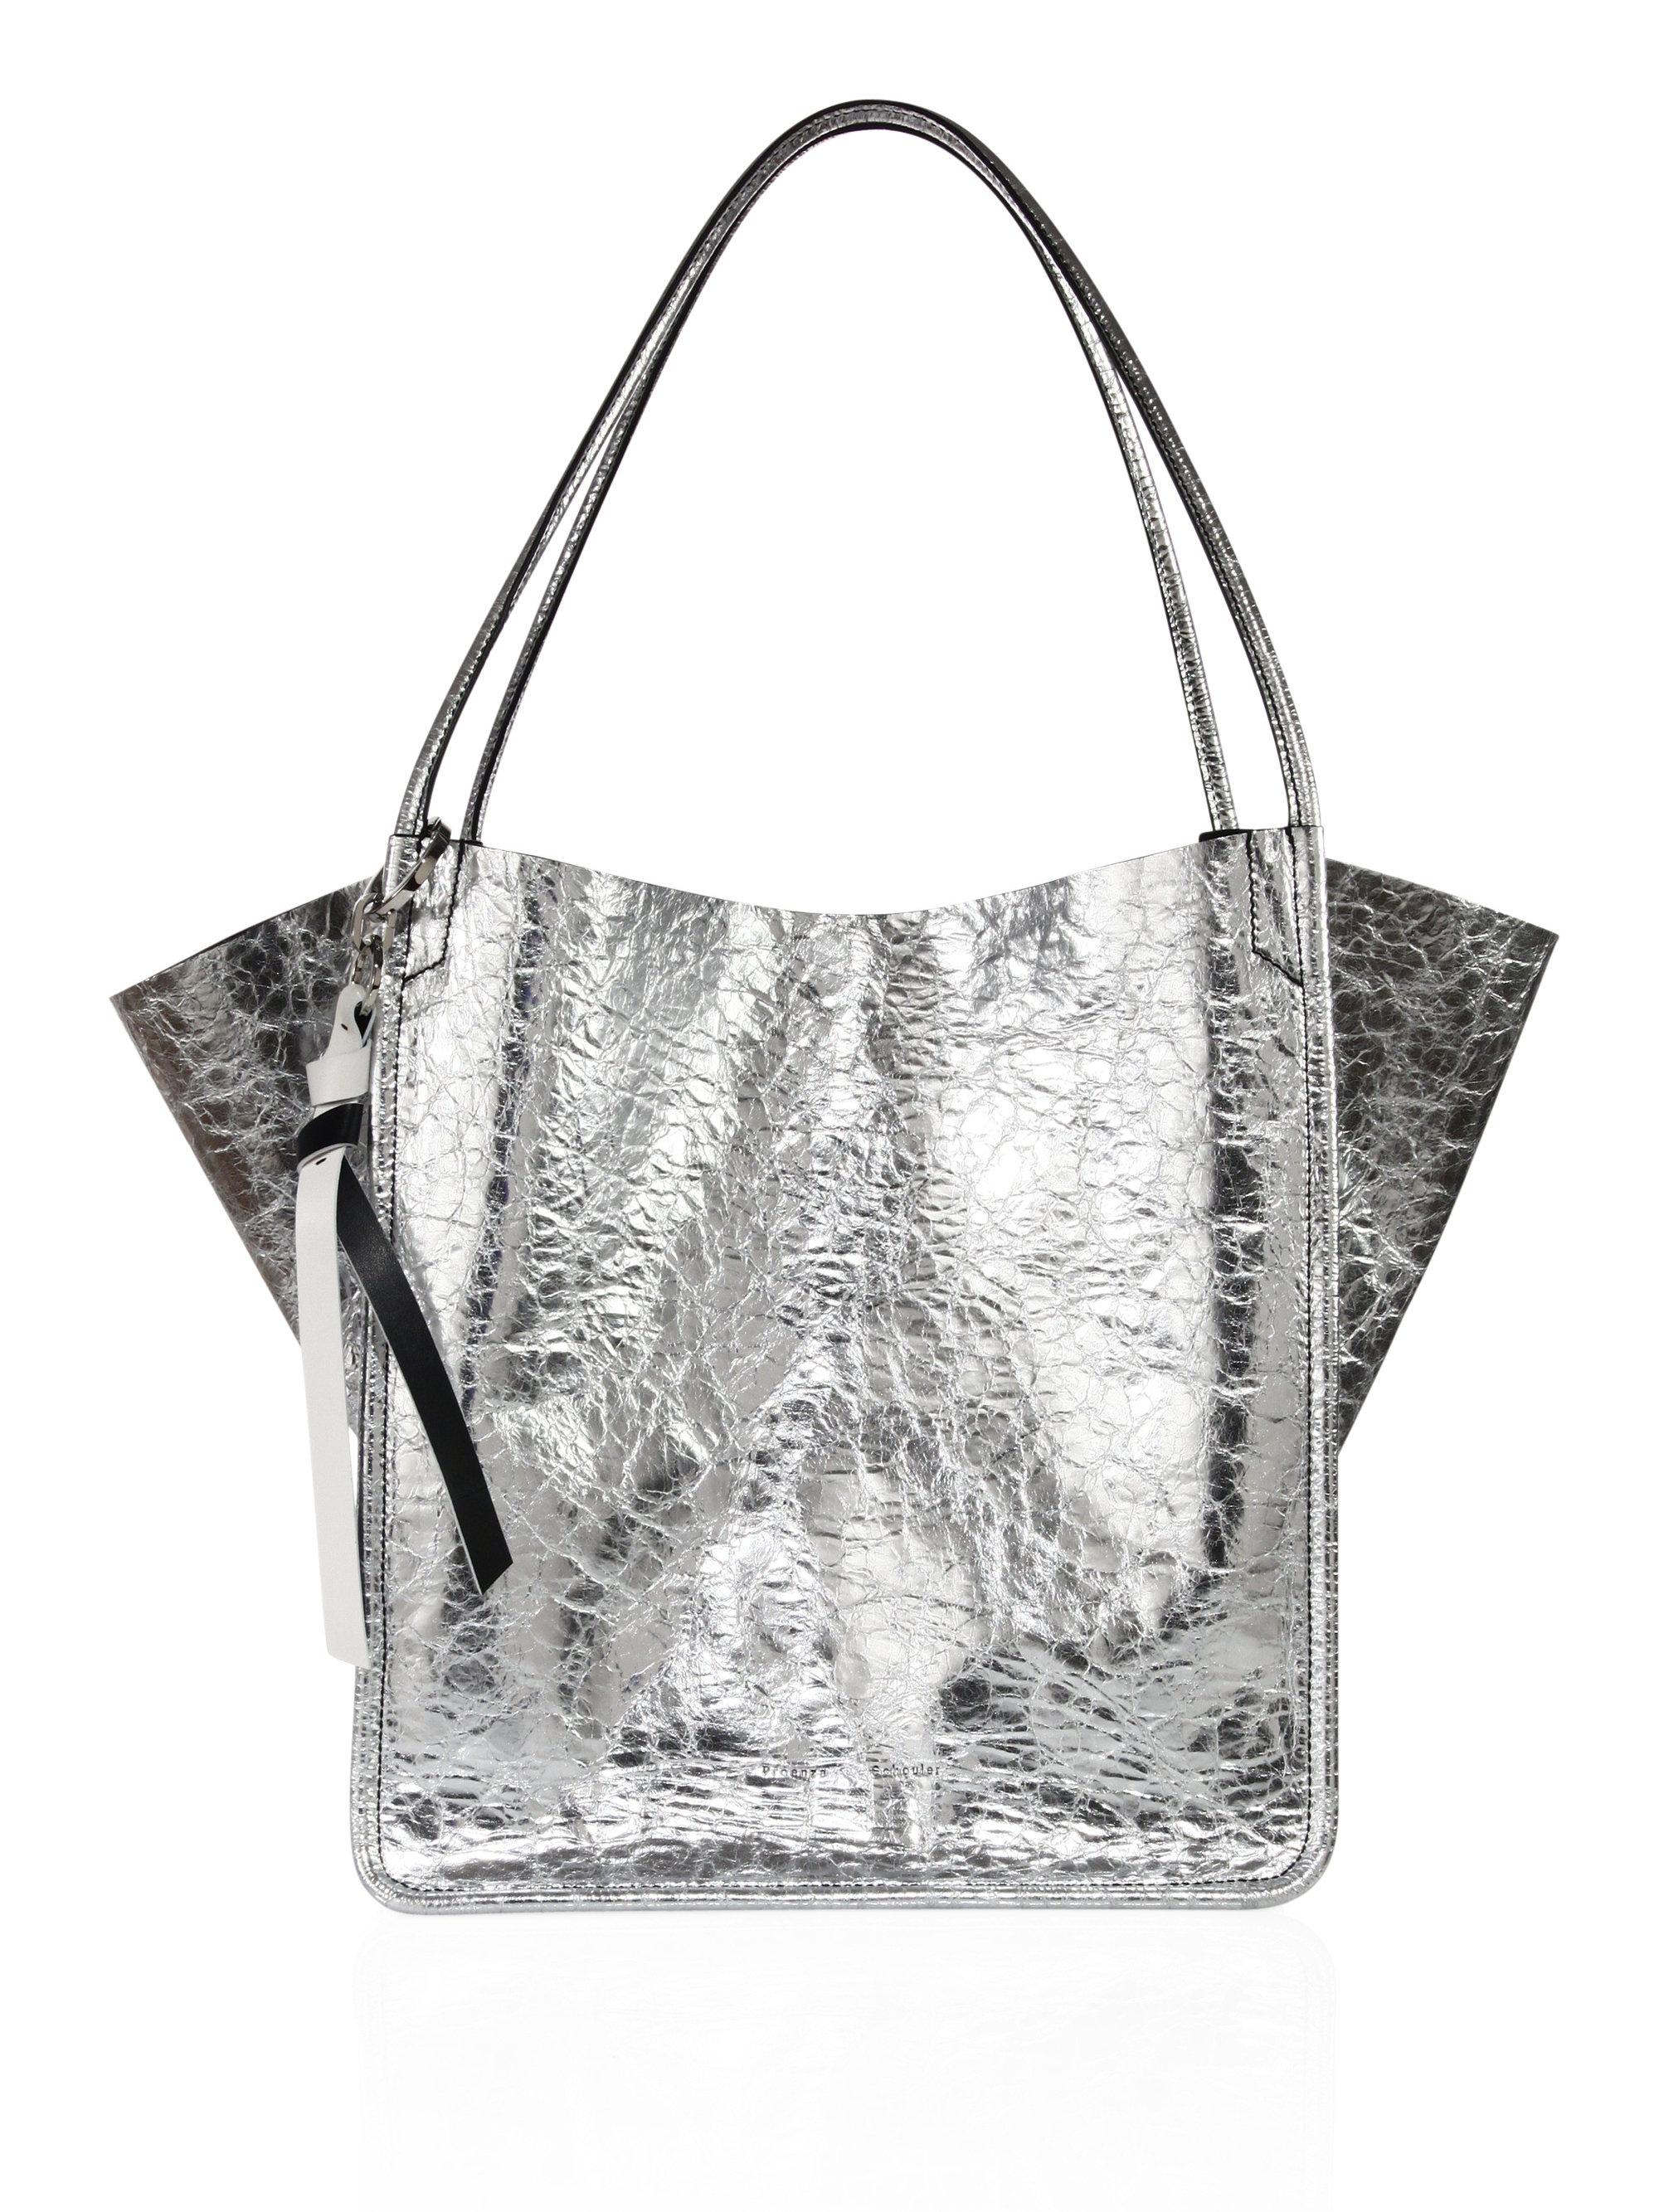 Proenza Schouler Crinkled Metallic Leather Tote - Lyst